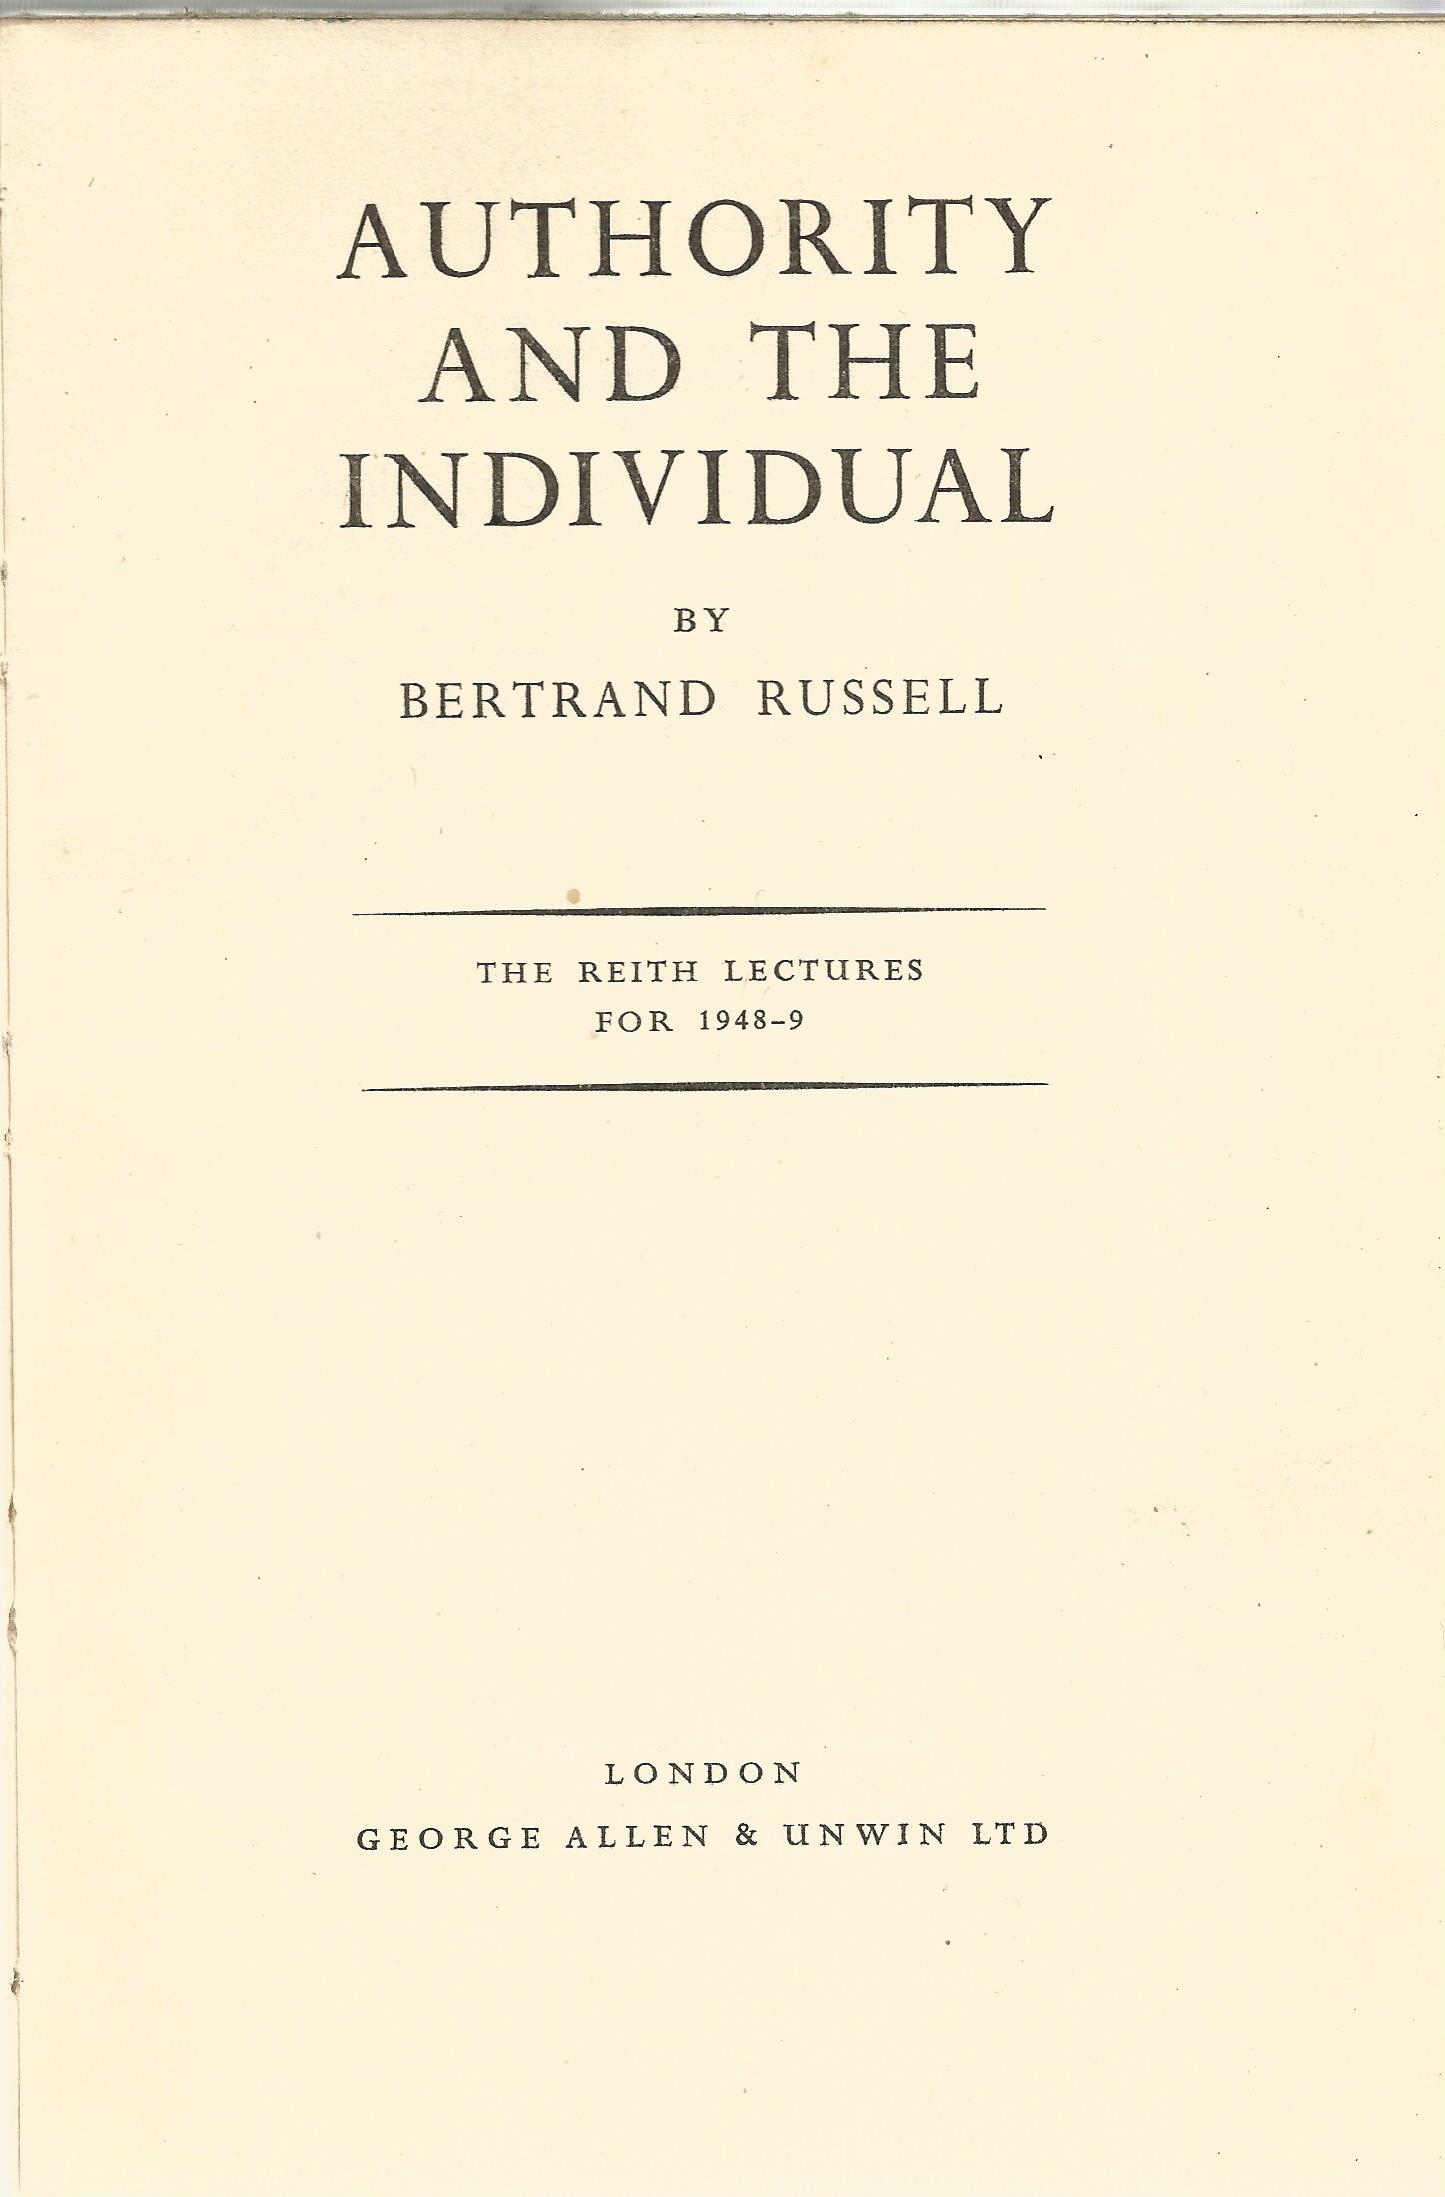 Authority and the Individual by Bertrand Russell Hardback Book 1949 First Edition published by - Image 2 of 3